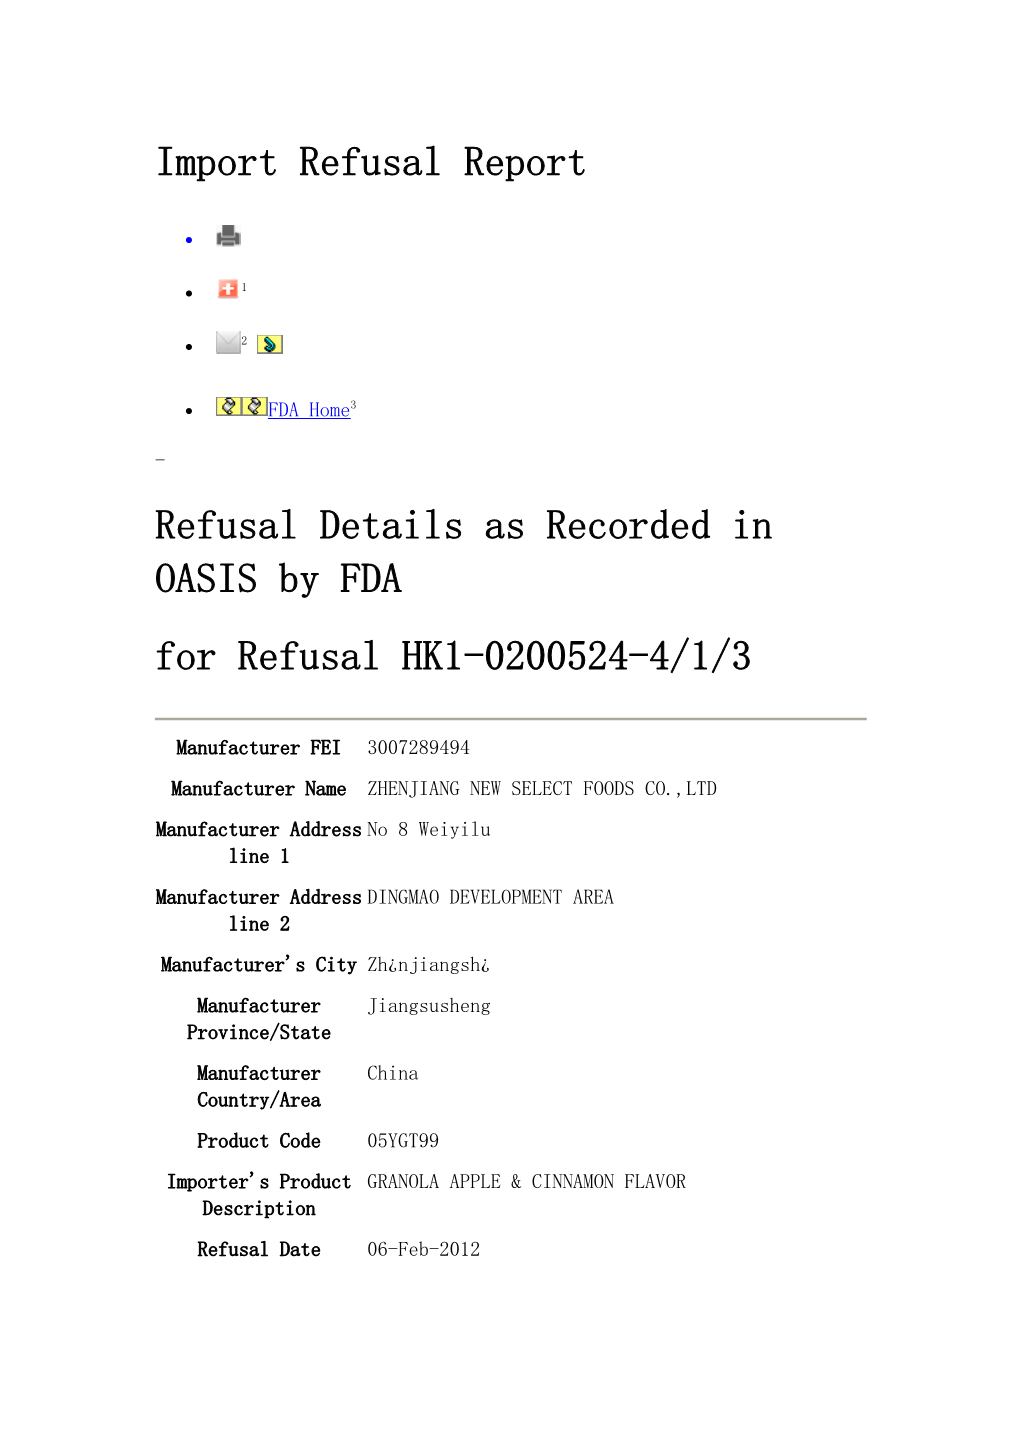 Refusal Details As Recorded in OASIS by FDA